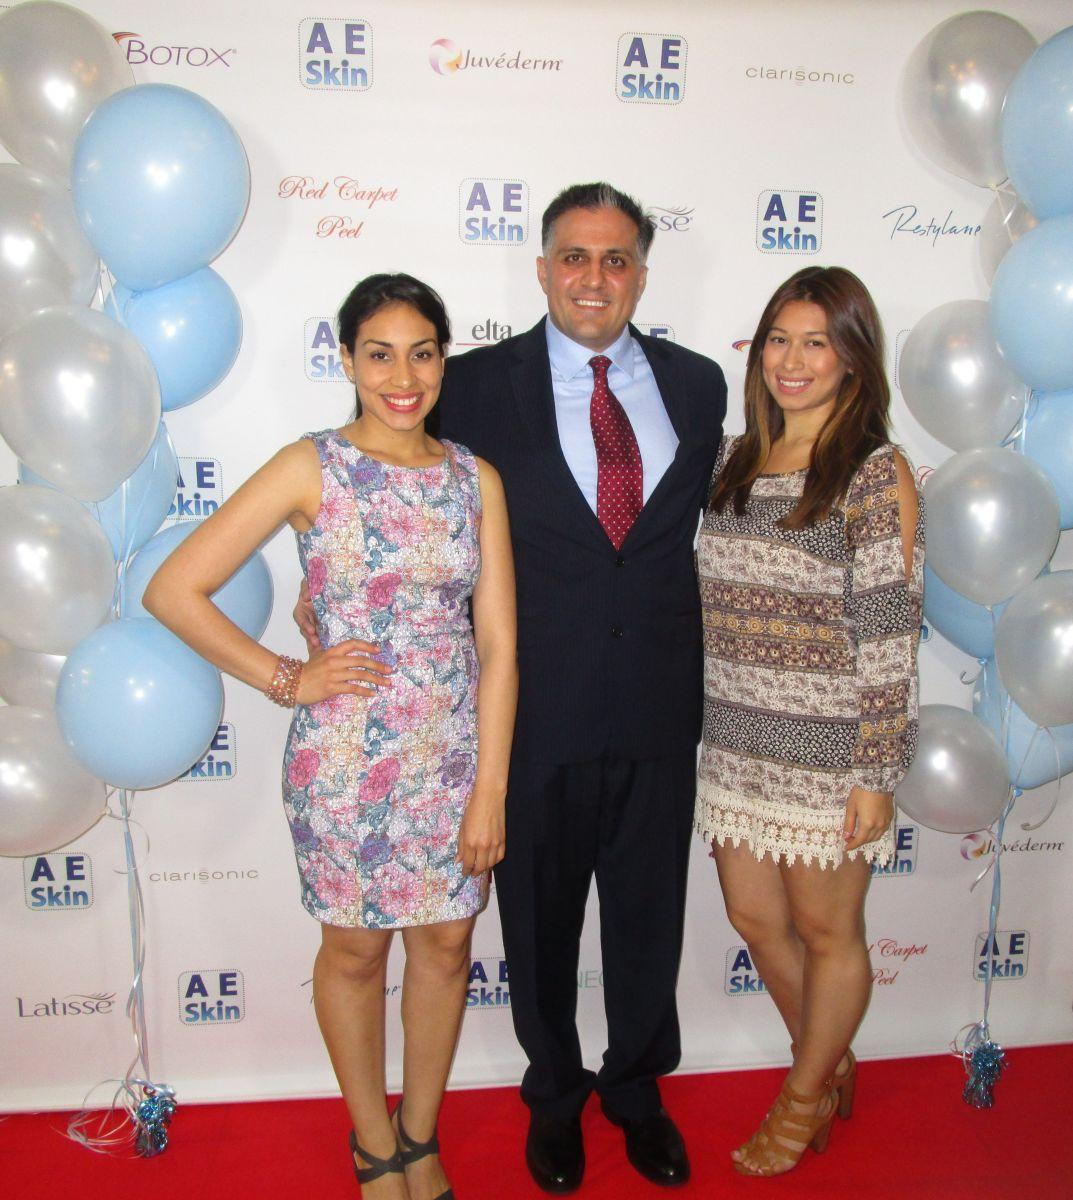 Dr. Alex with Karla and Erica